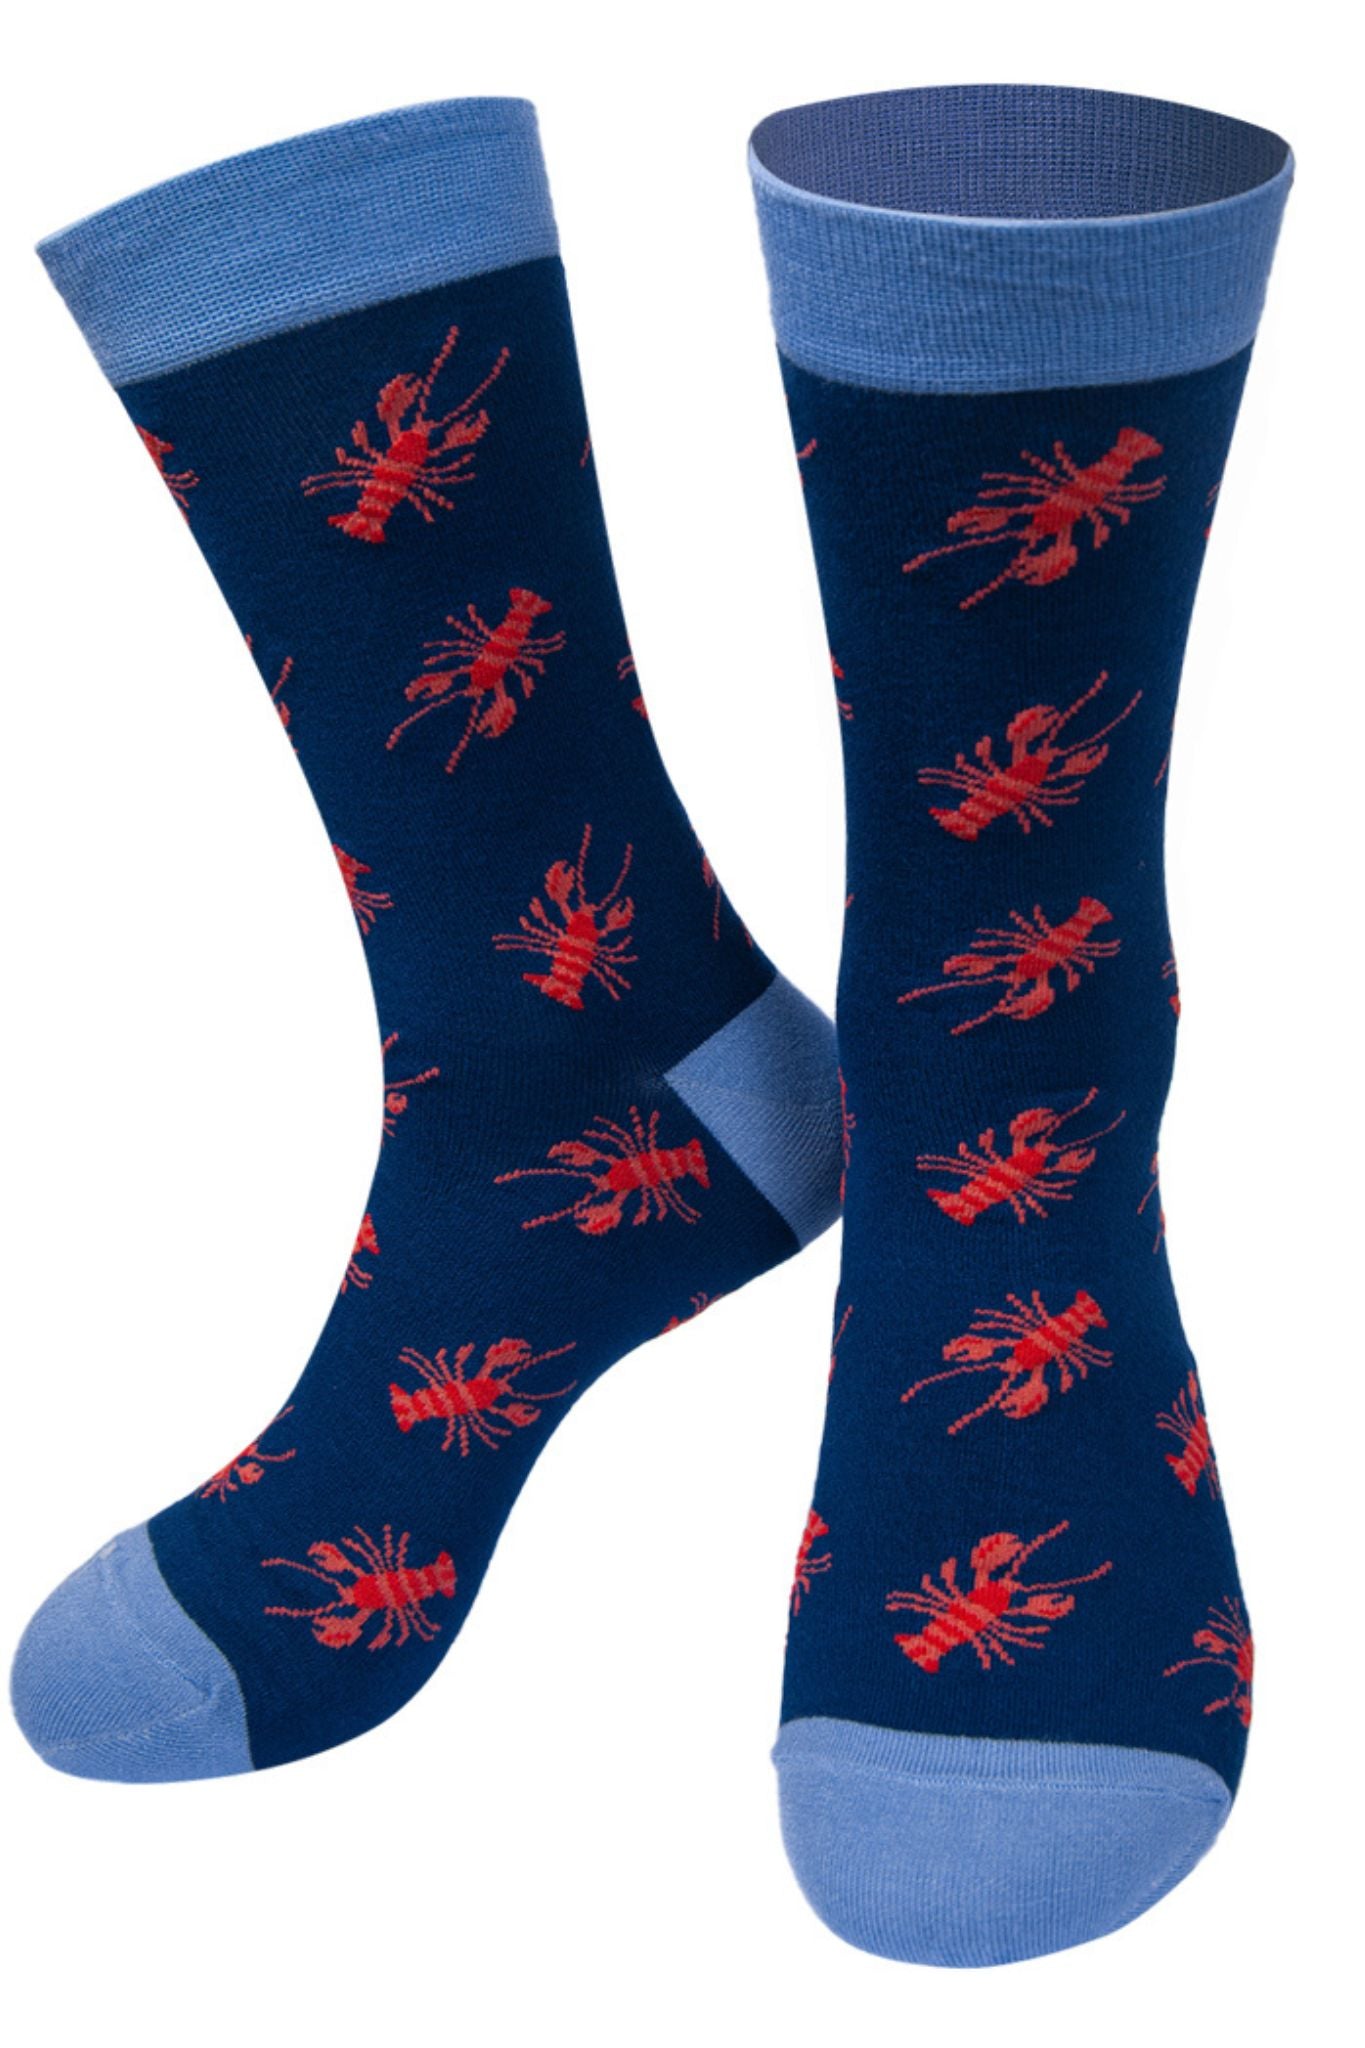 blue socks with an all over red lobster print pattern